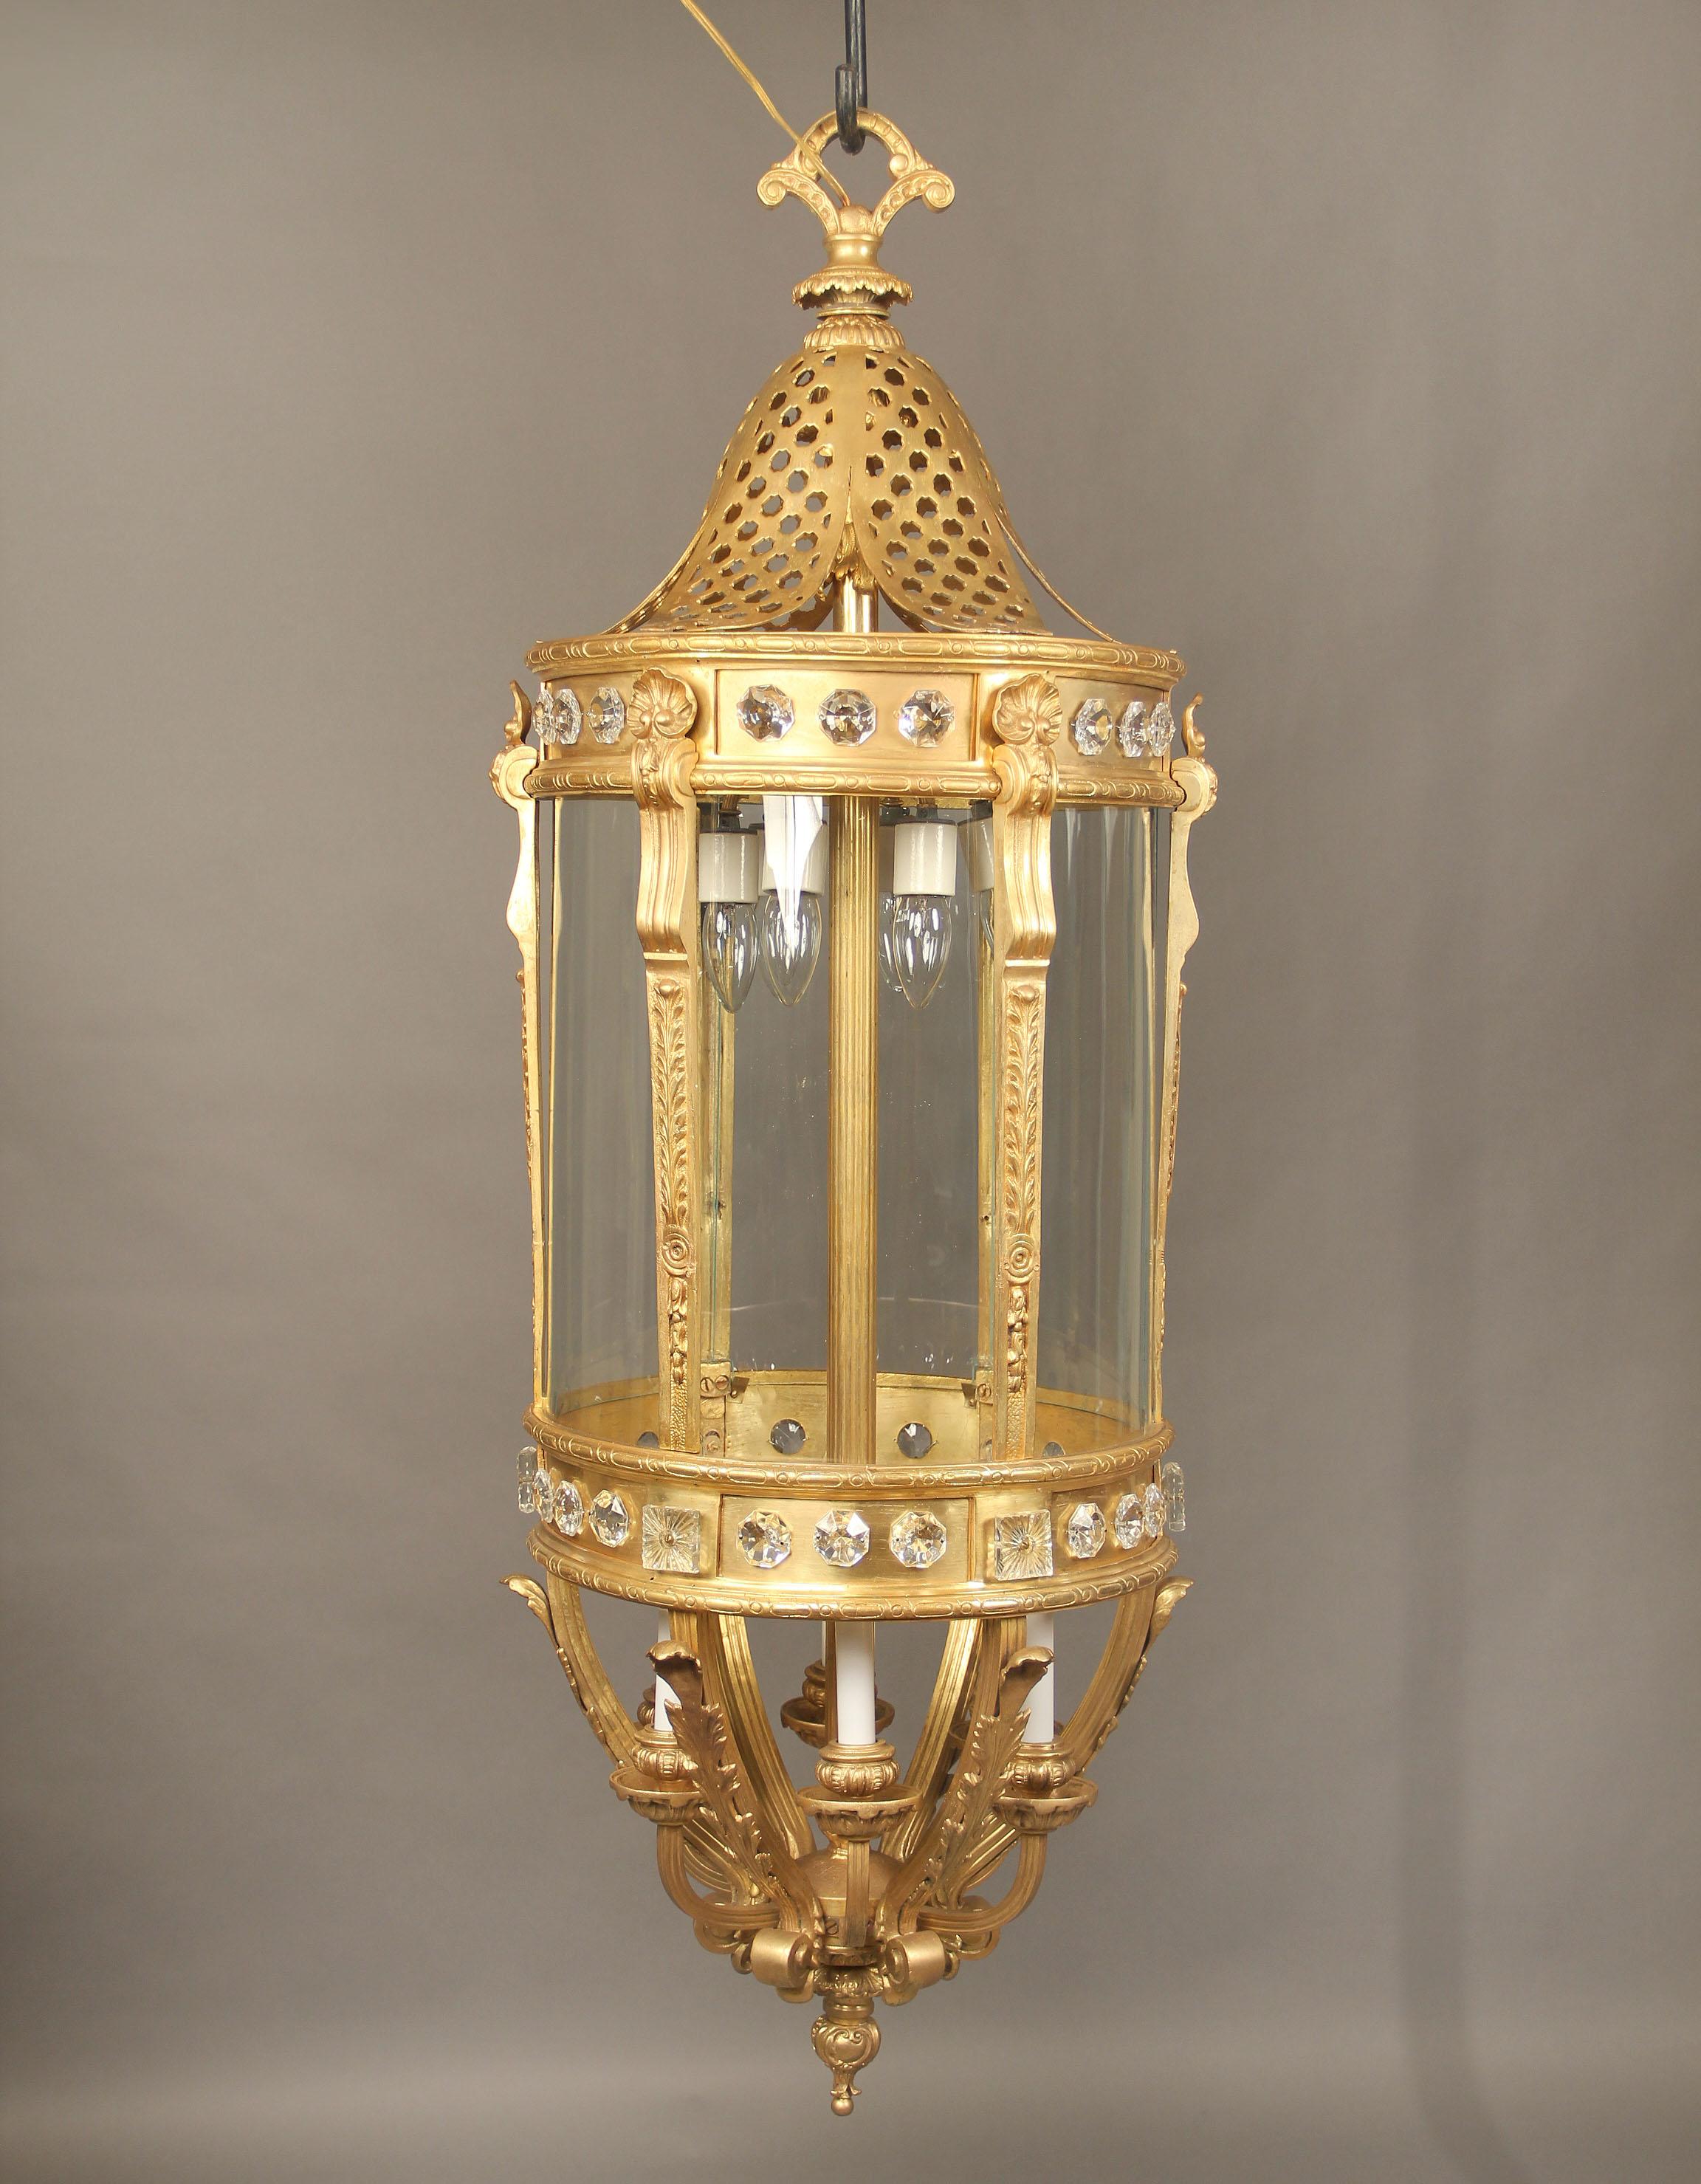 A monumental late 19th century gilt bronze and crystal twelve-light lantern.

Long and oval form with crystals around the body, six lower and six upper interior lights.